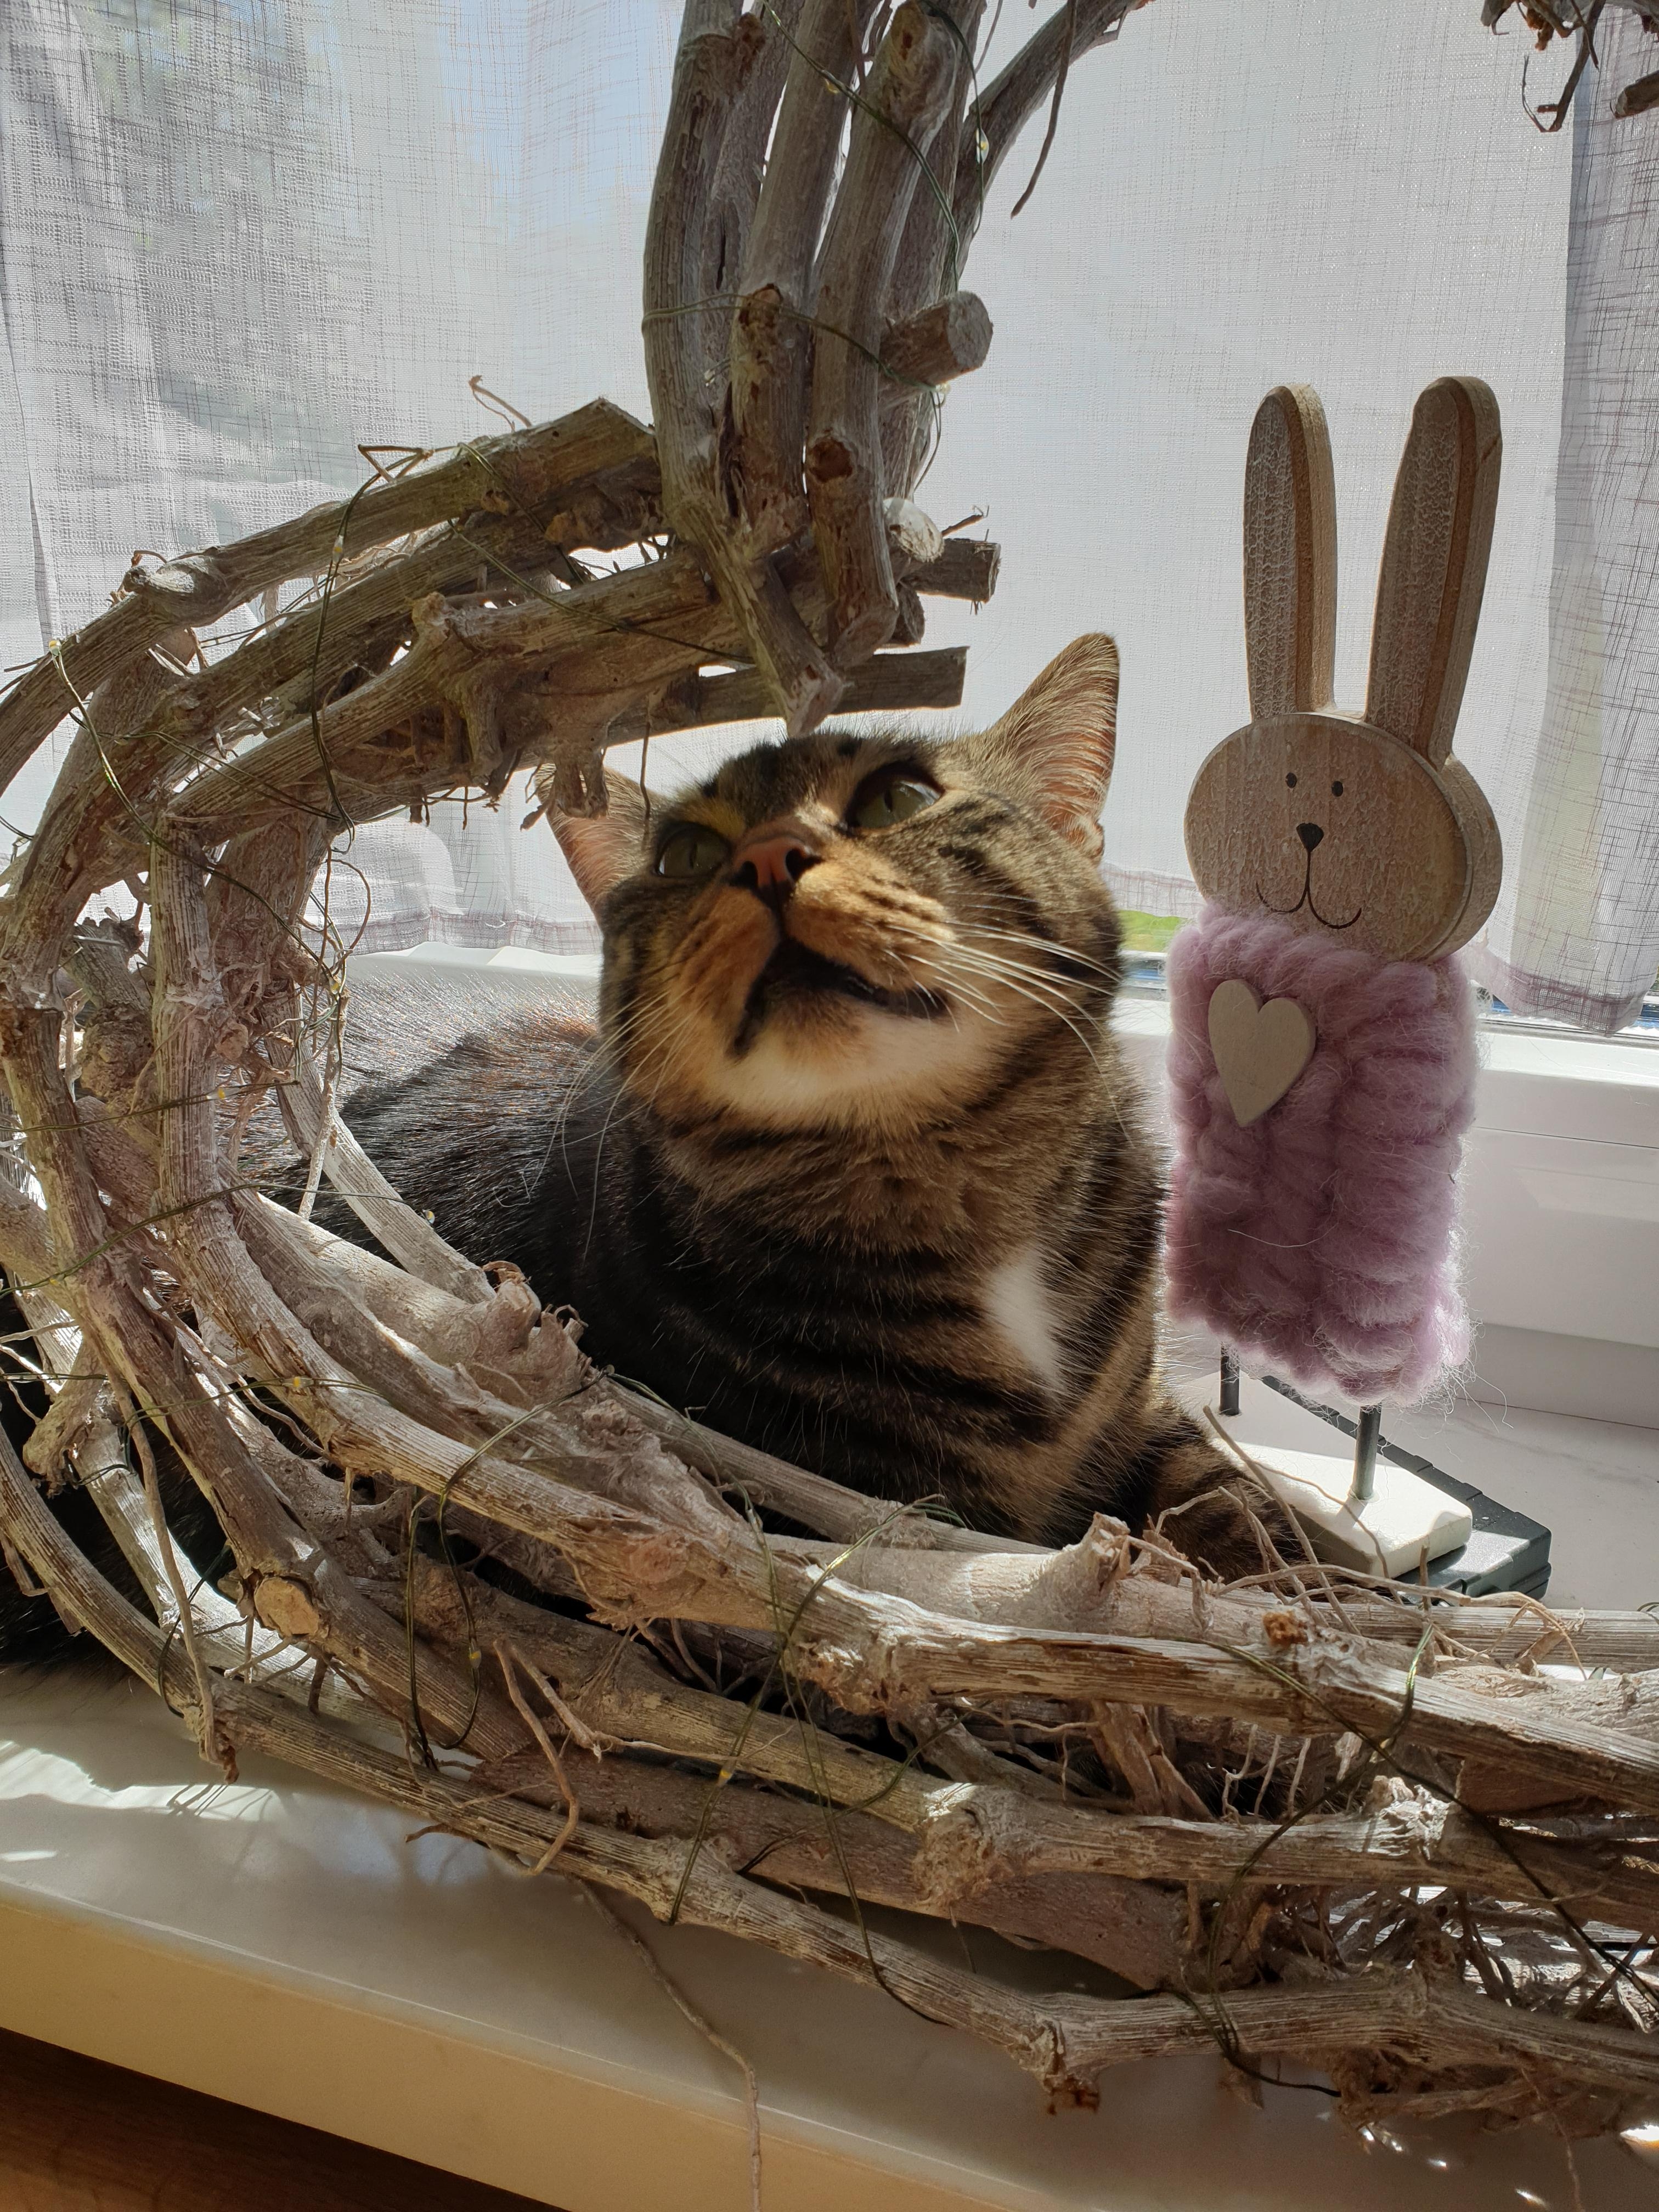 Frohe Ostern 🐇😻 #kater #catcontent #weide #hase #küche #ostern